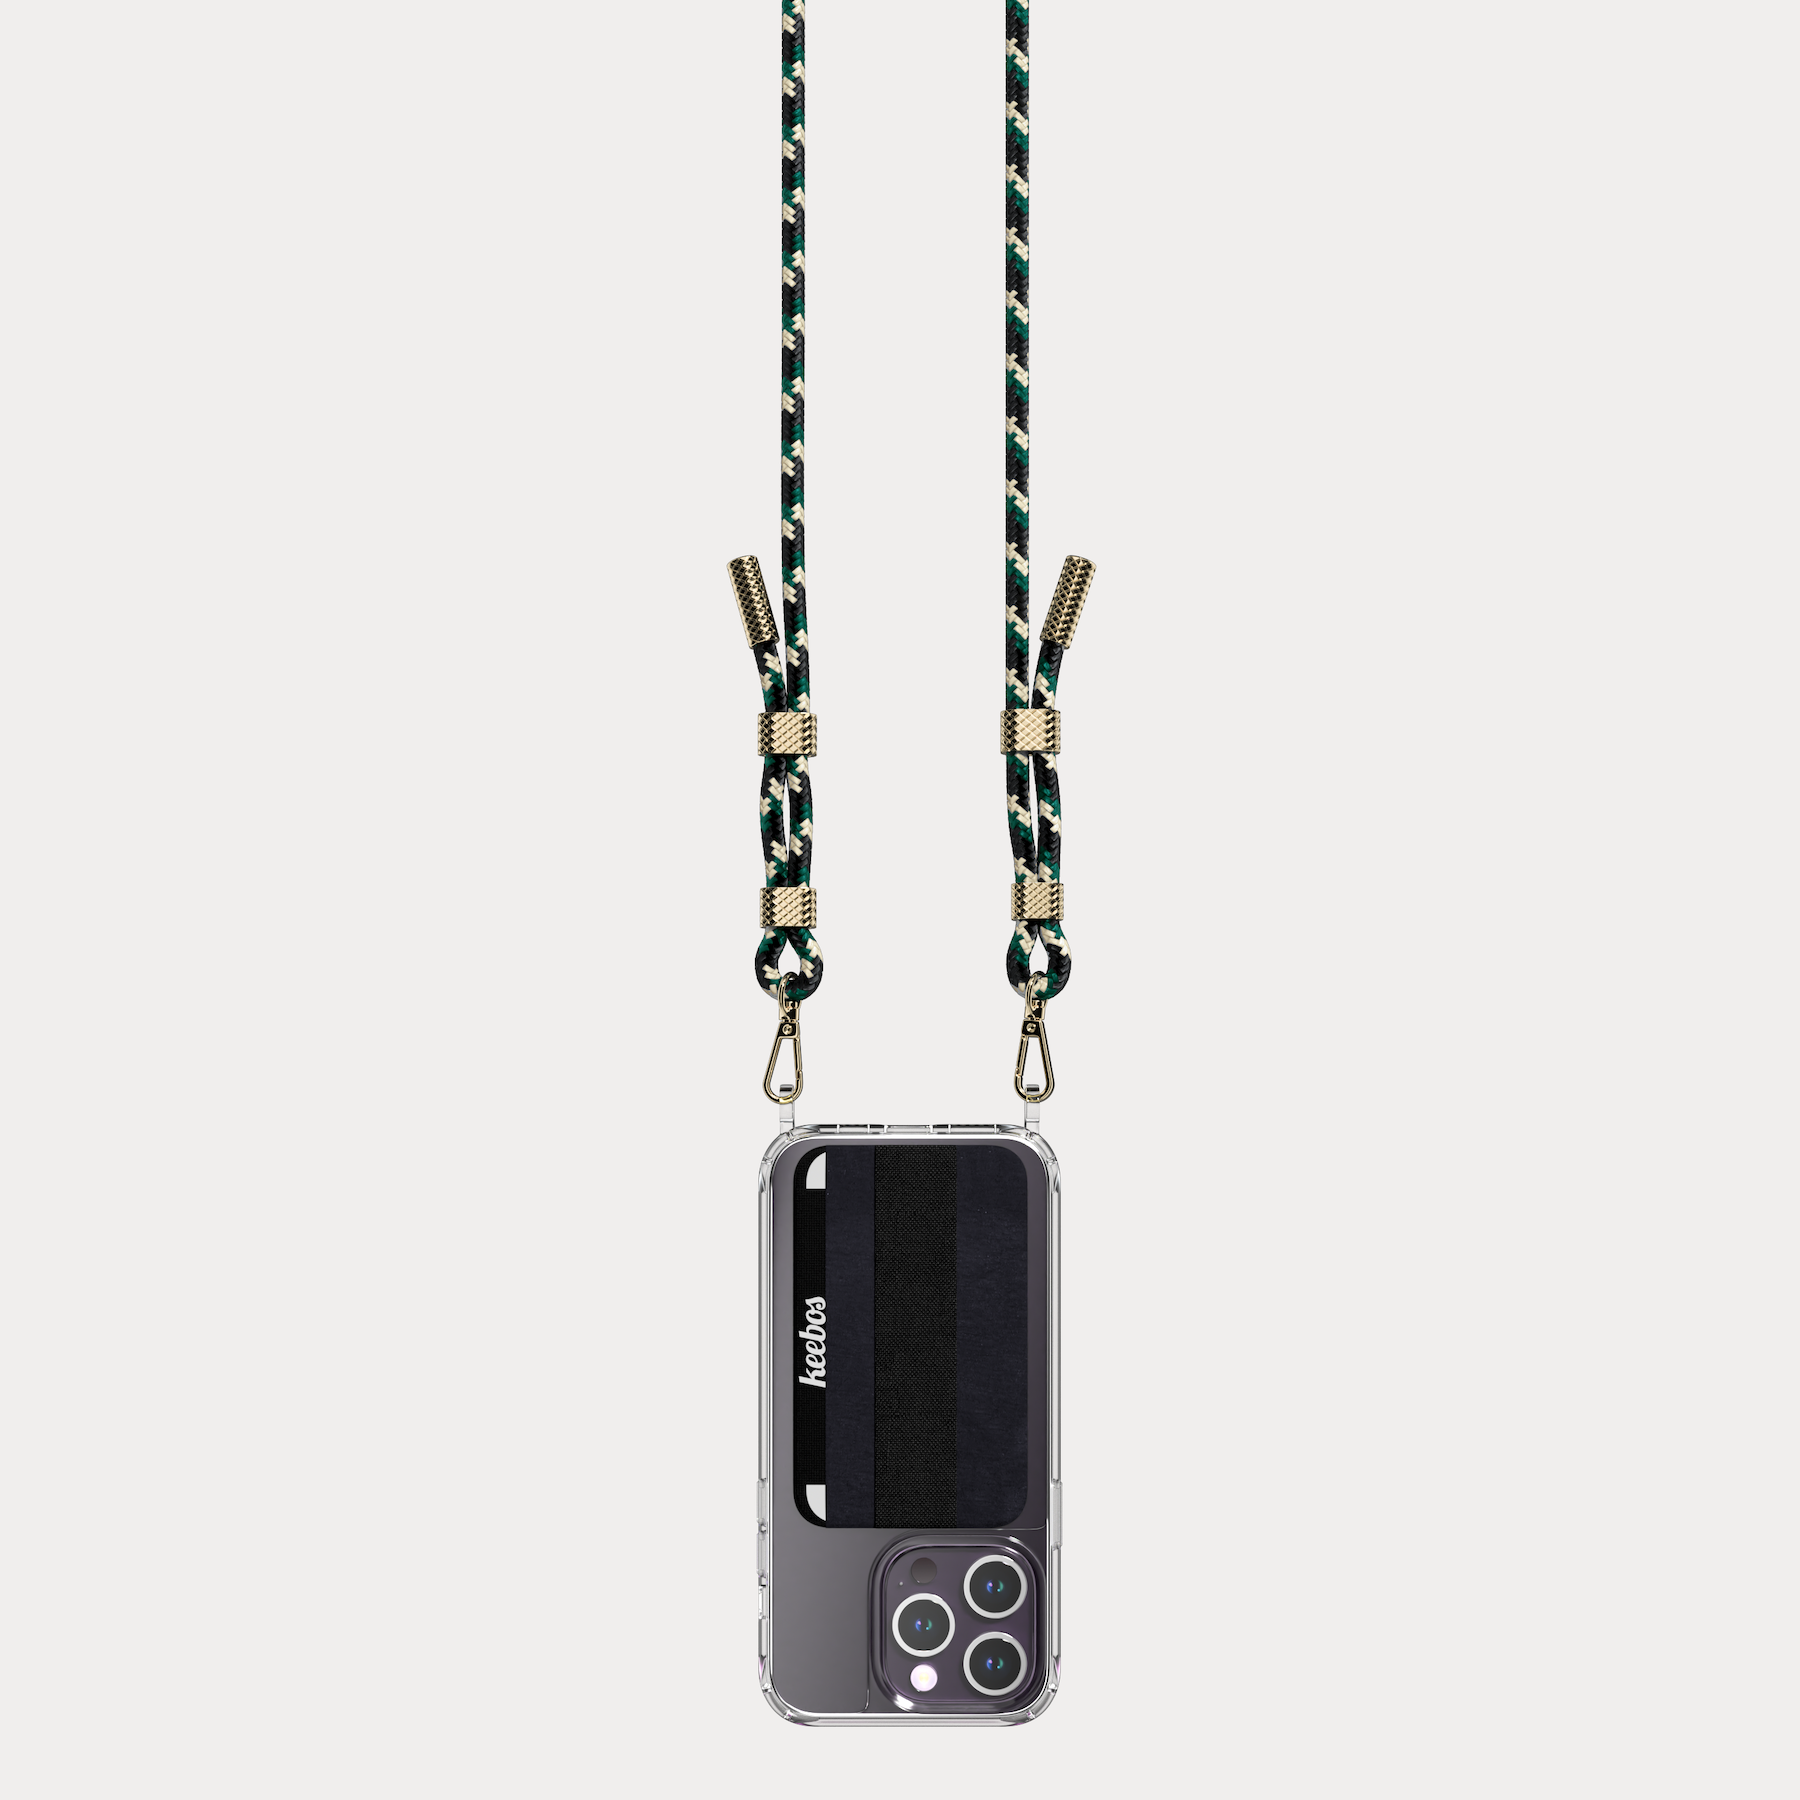 Necklace strap for mobile phone : r/avoidchineseproducts